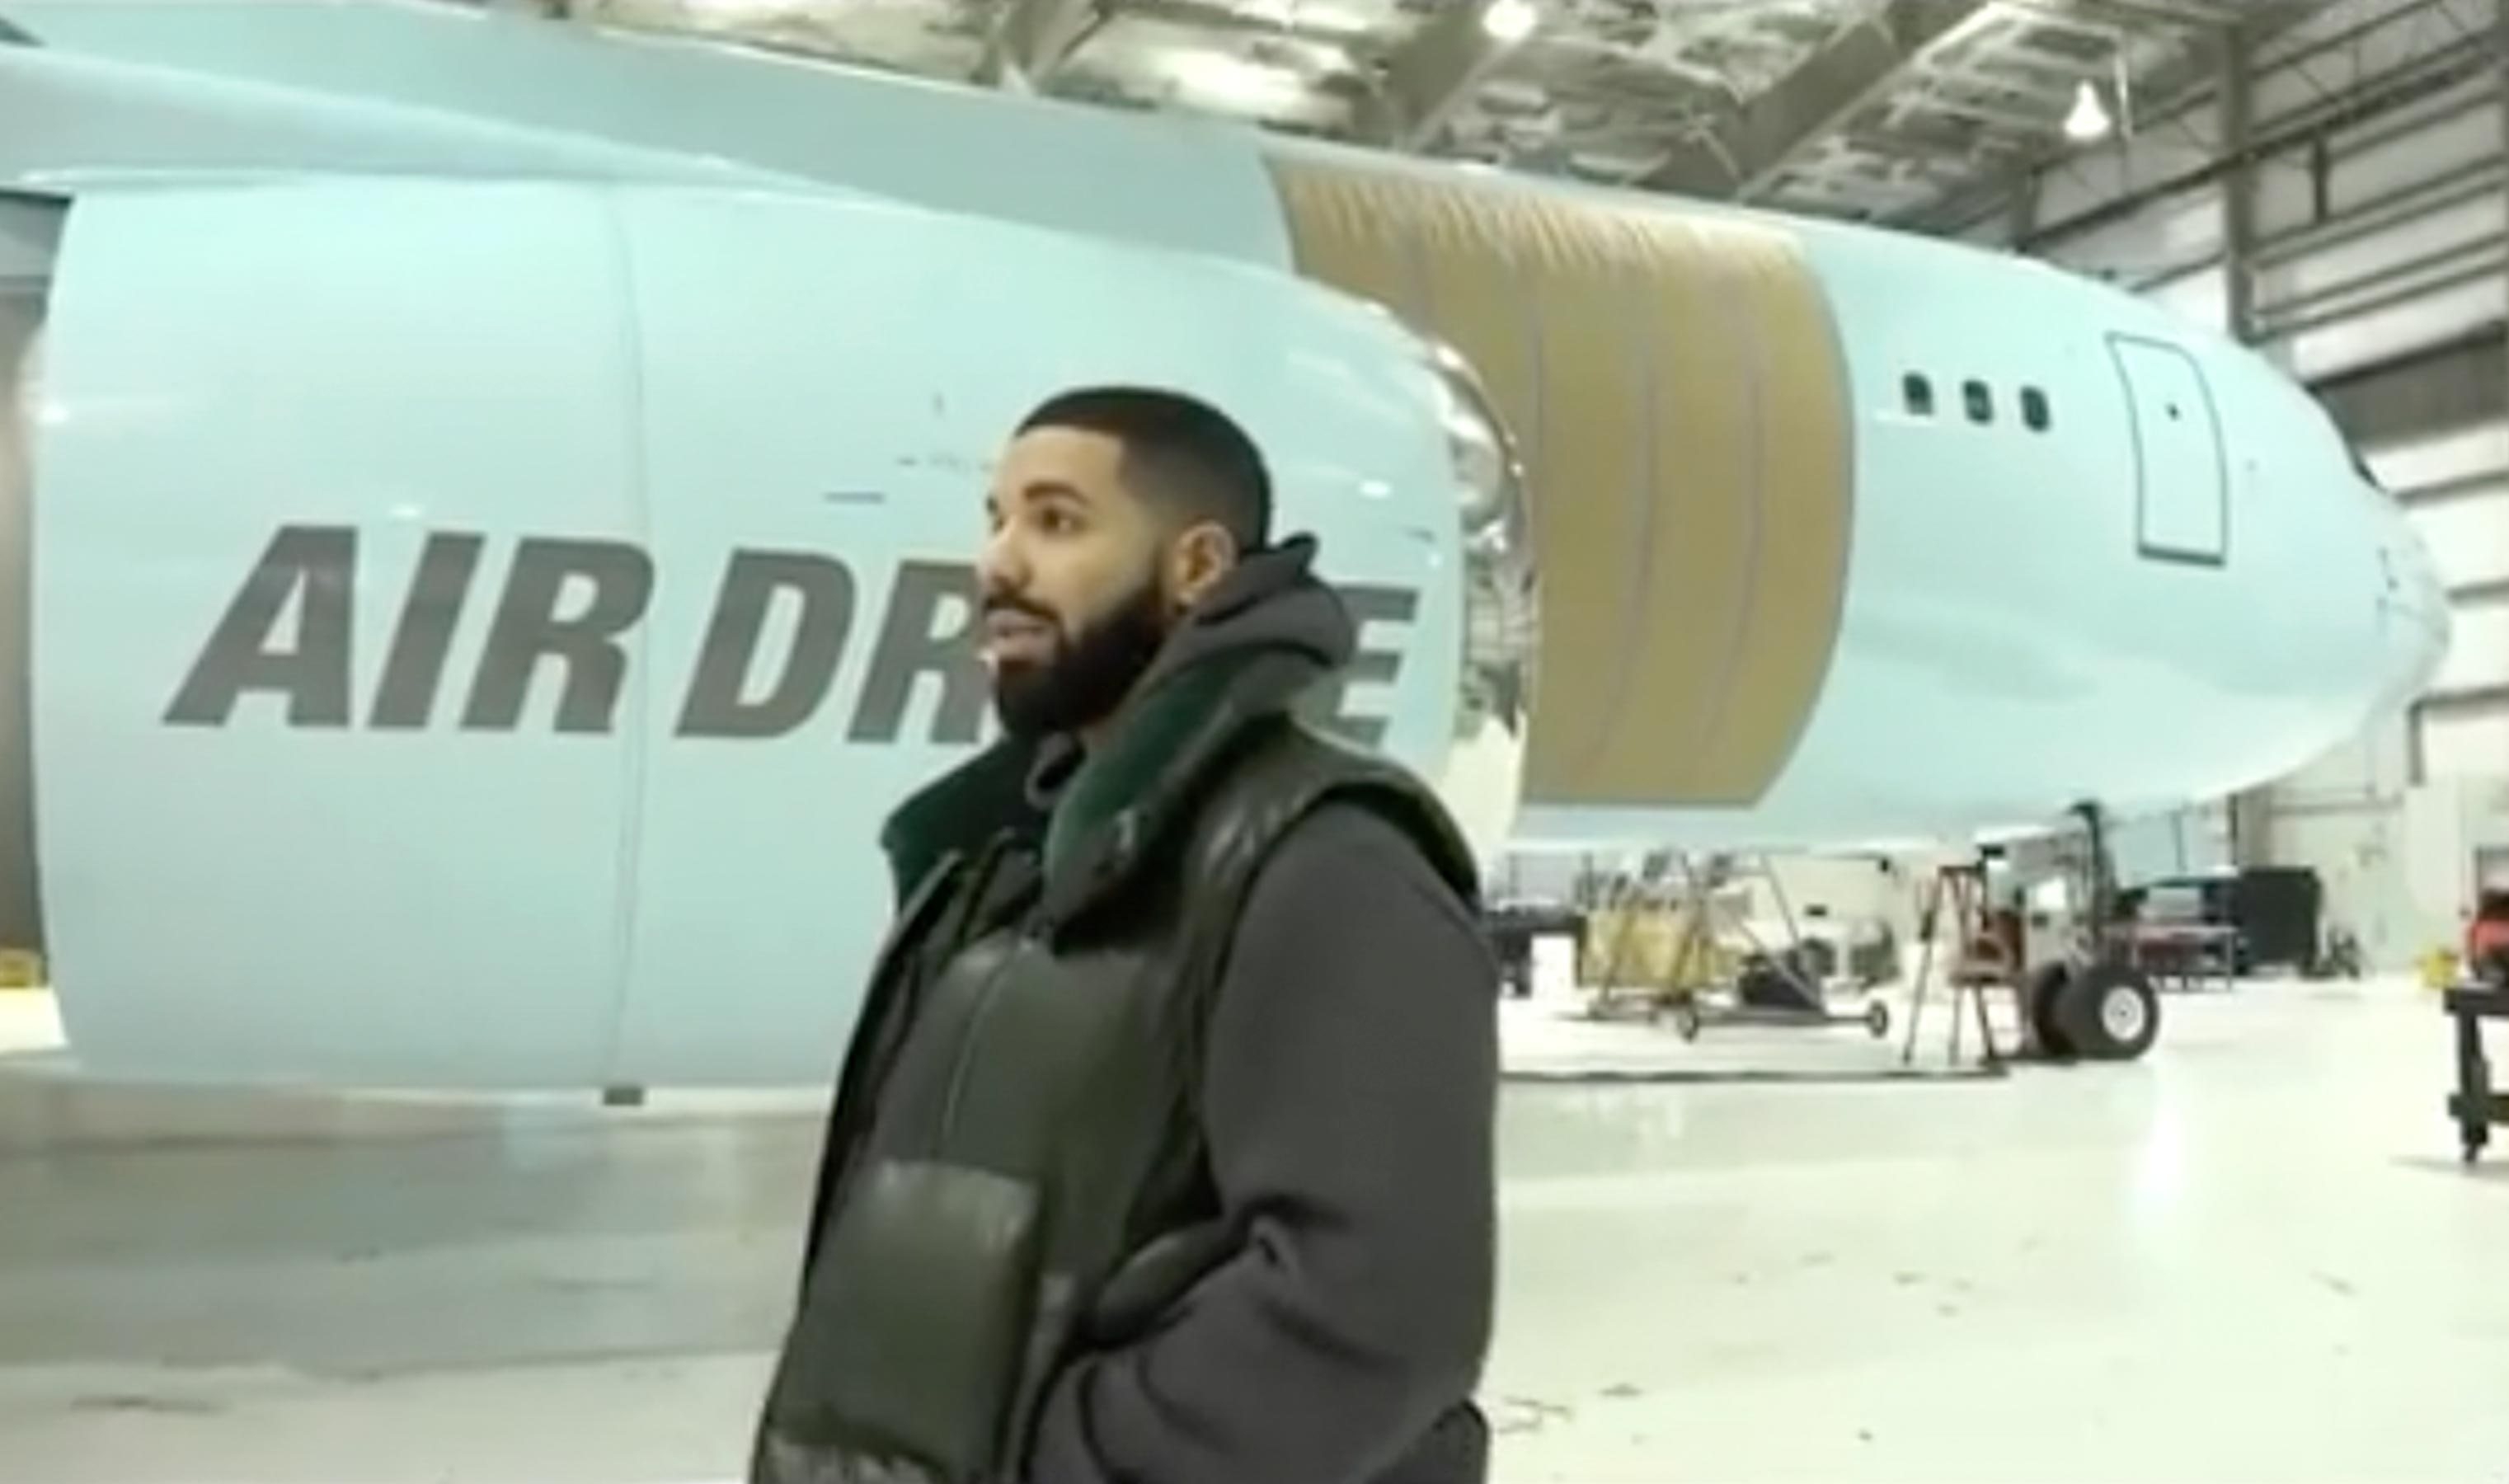 Drake Has Turned a Massive 767 Cargo Plane Into a $185 Million Flying Oasis Named ‘Air Drake’